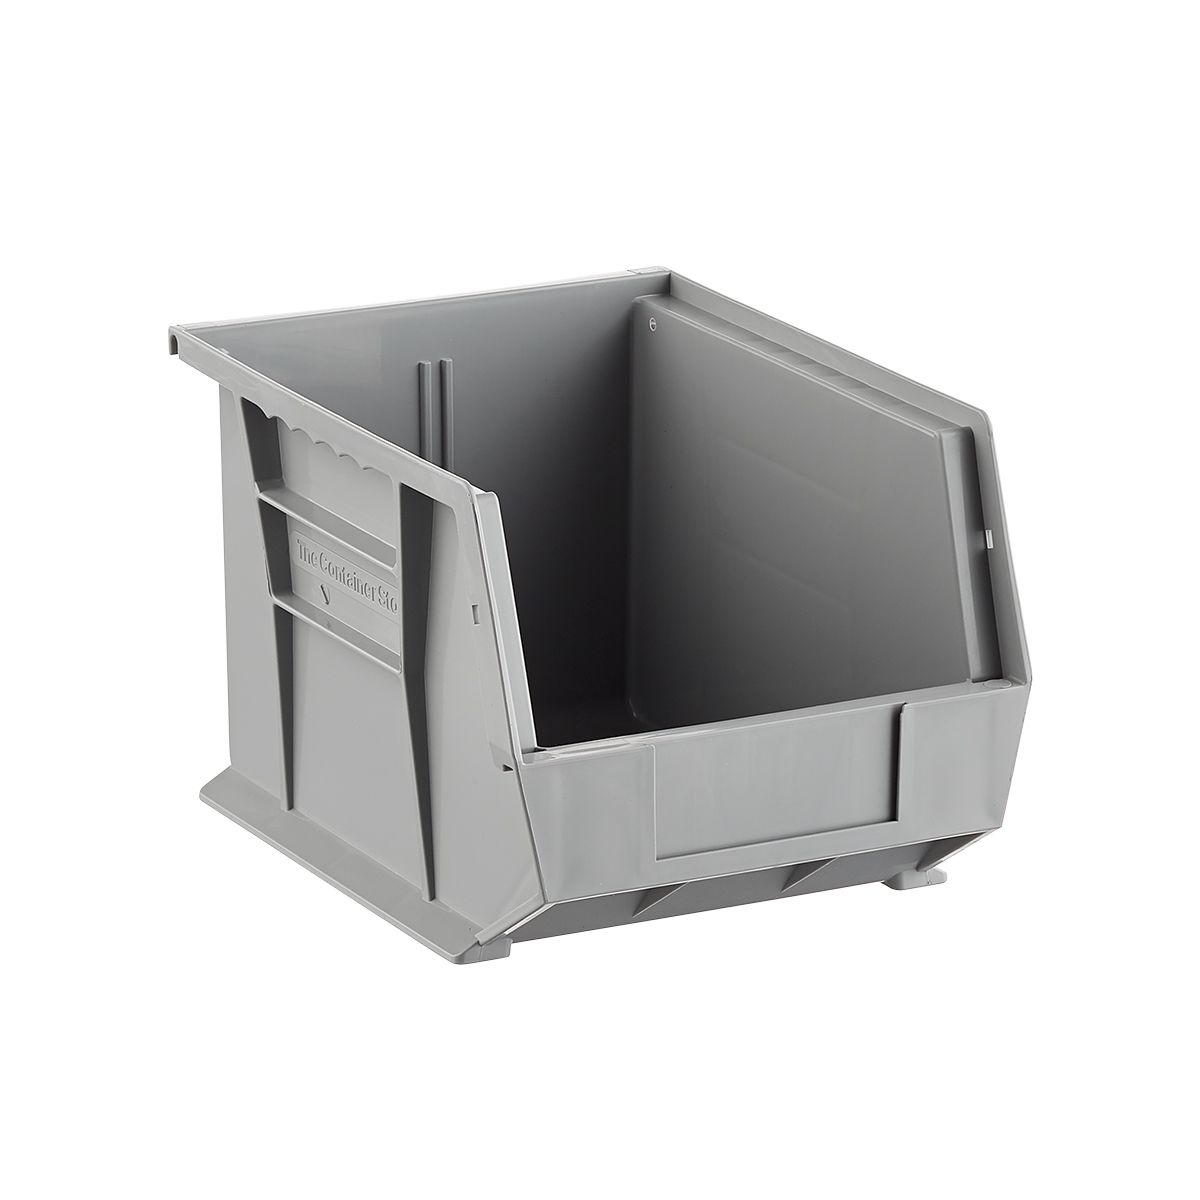 Medium Stackable Plastic Utility Bin Grey | The Container Store